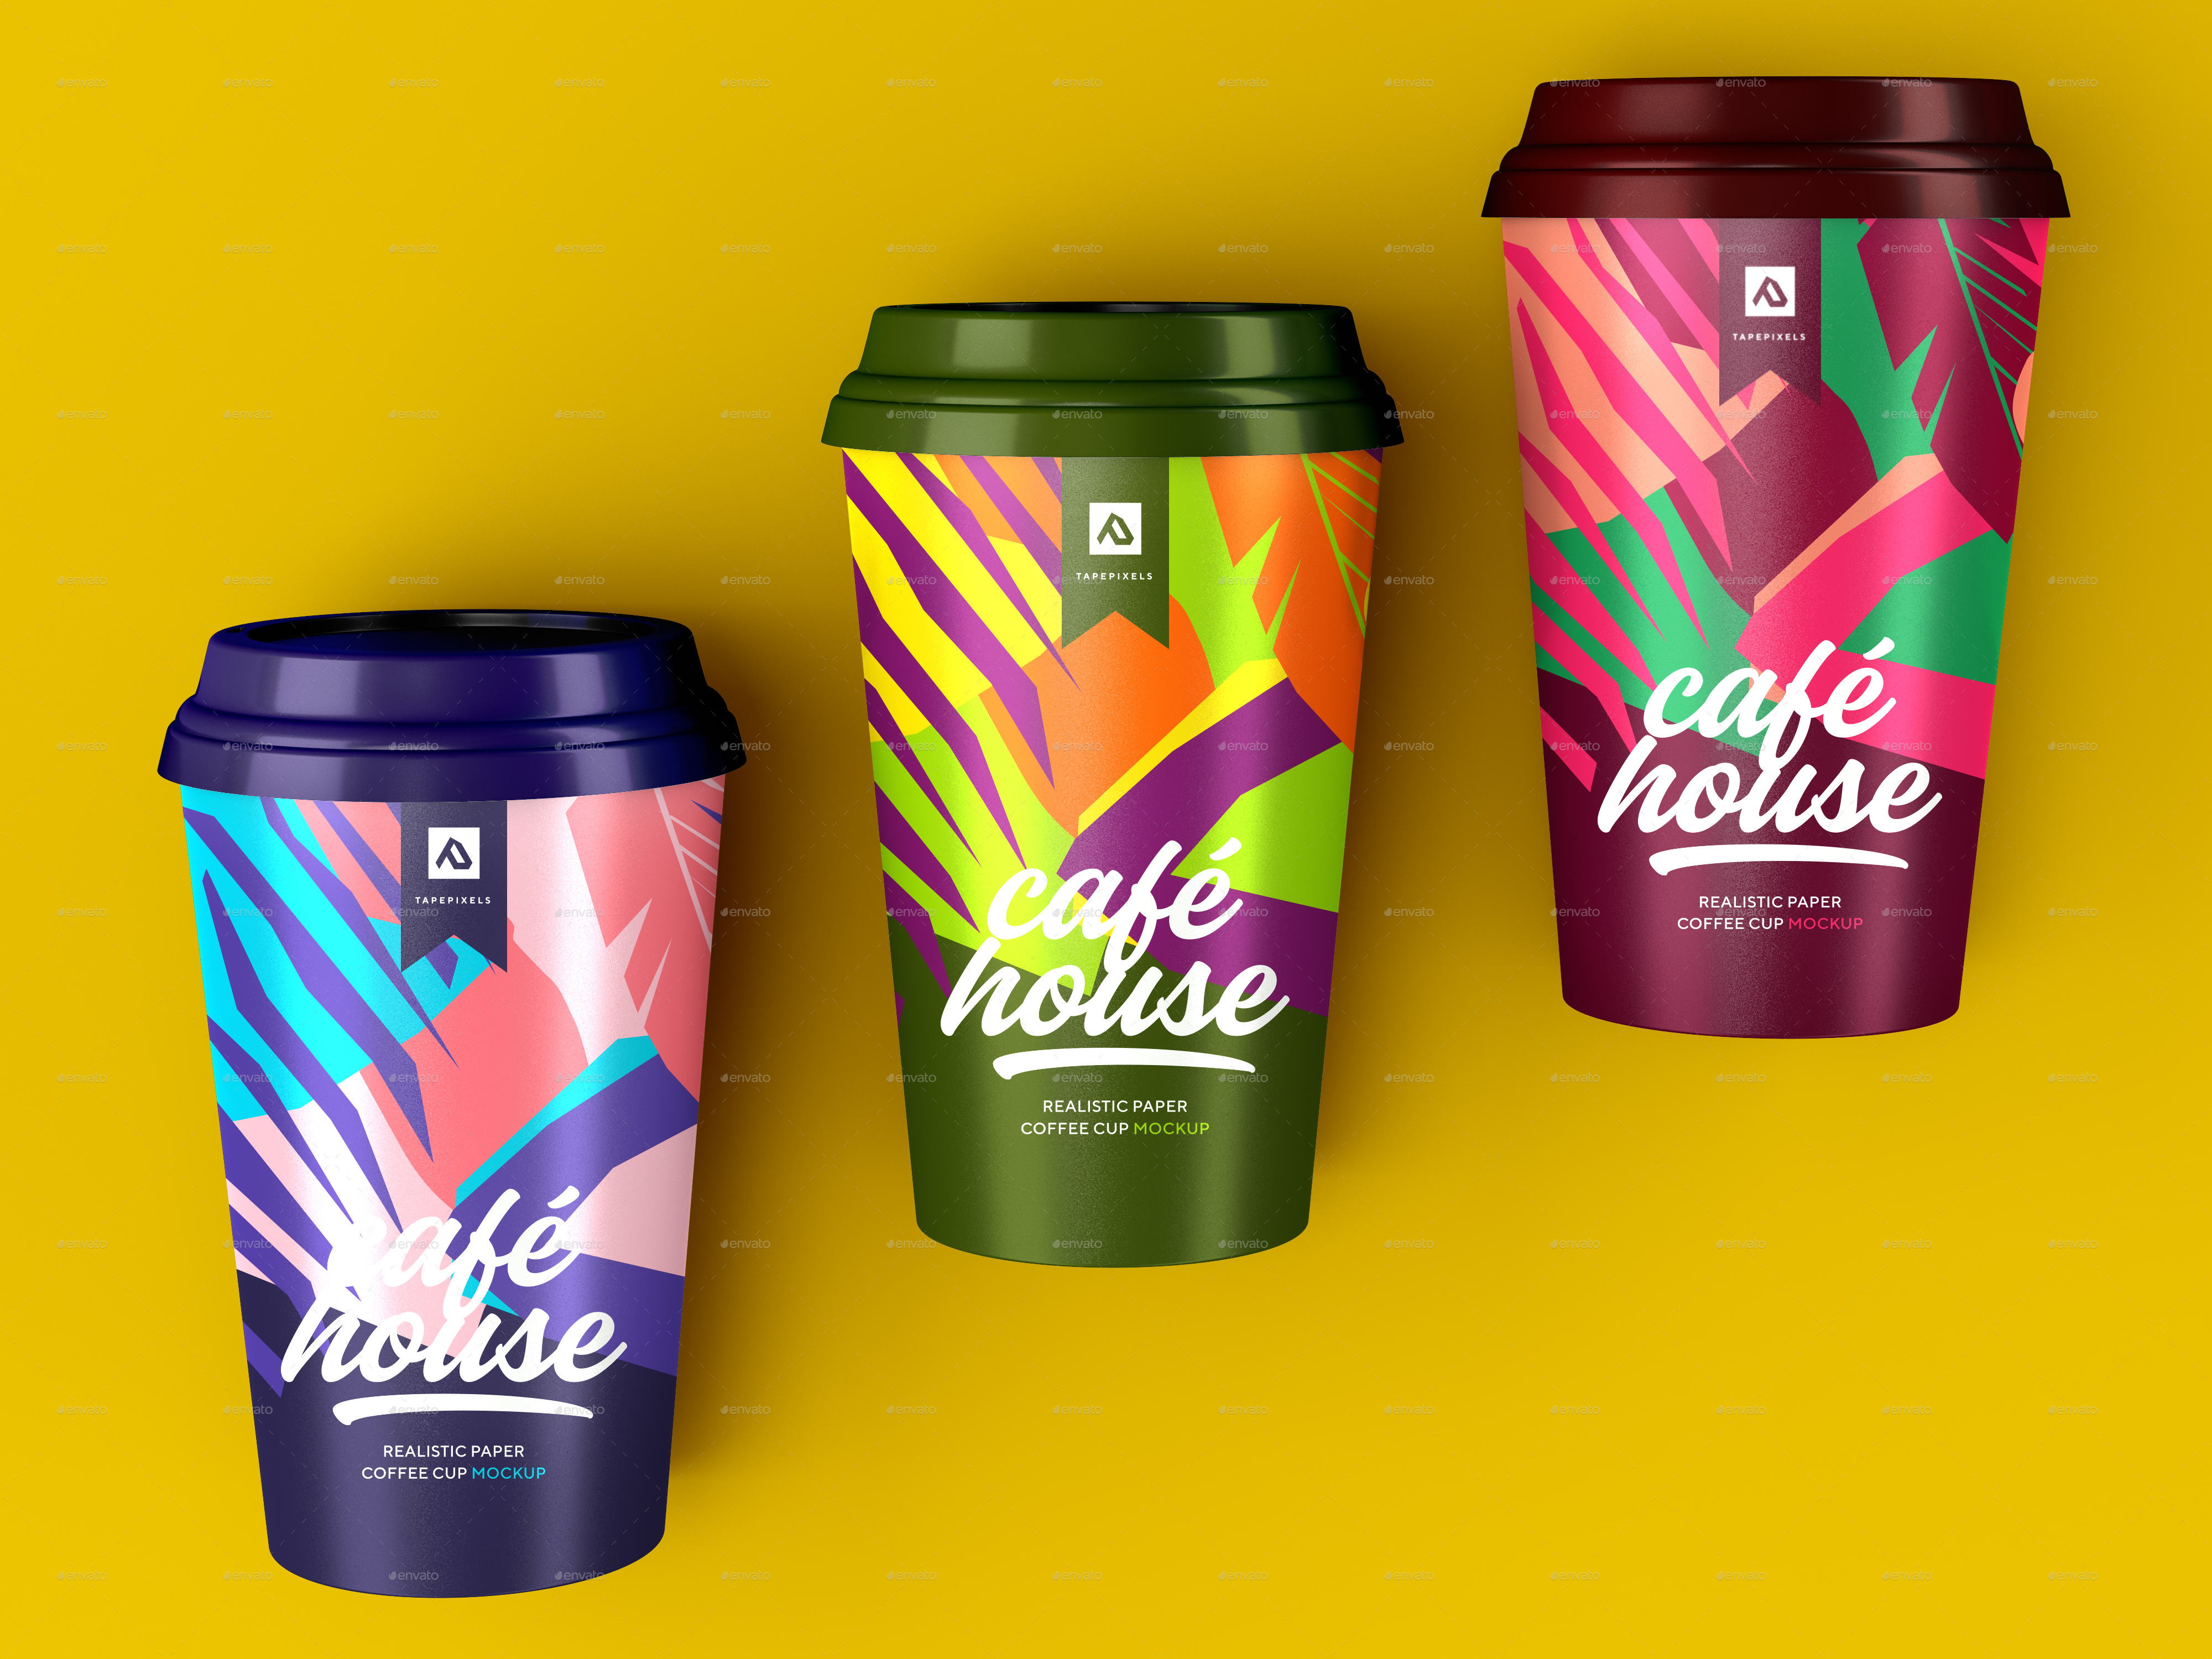 Download Take Away Paper Coffee Cup Mockup Set by tapepixels ...